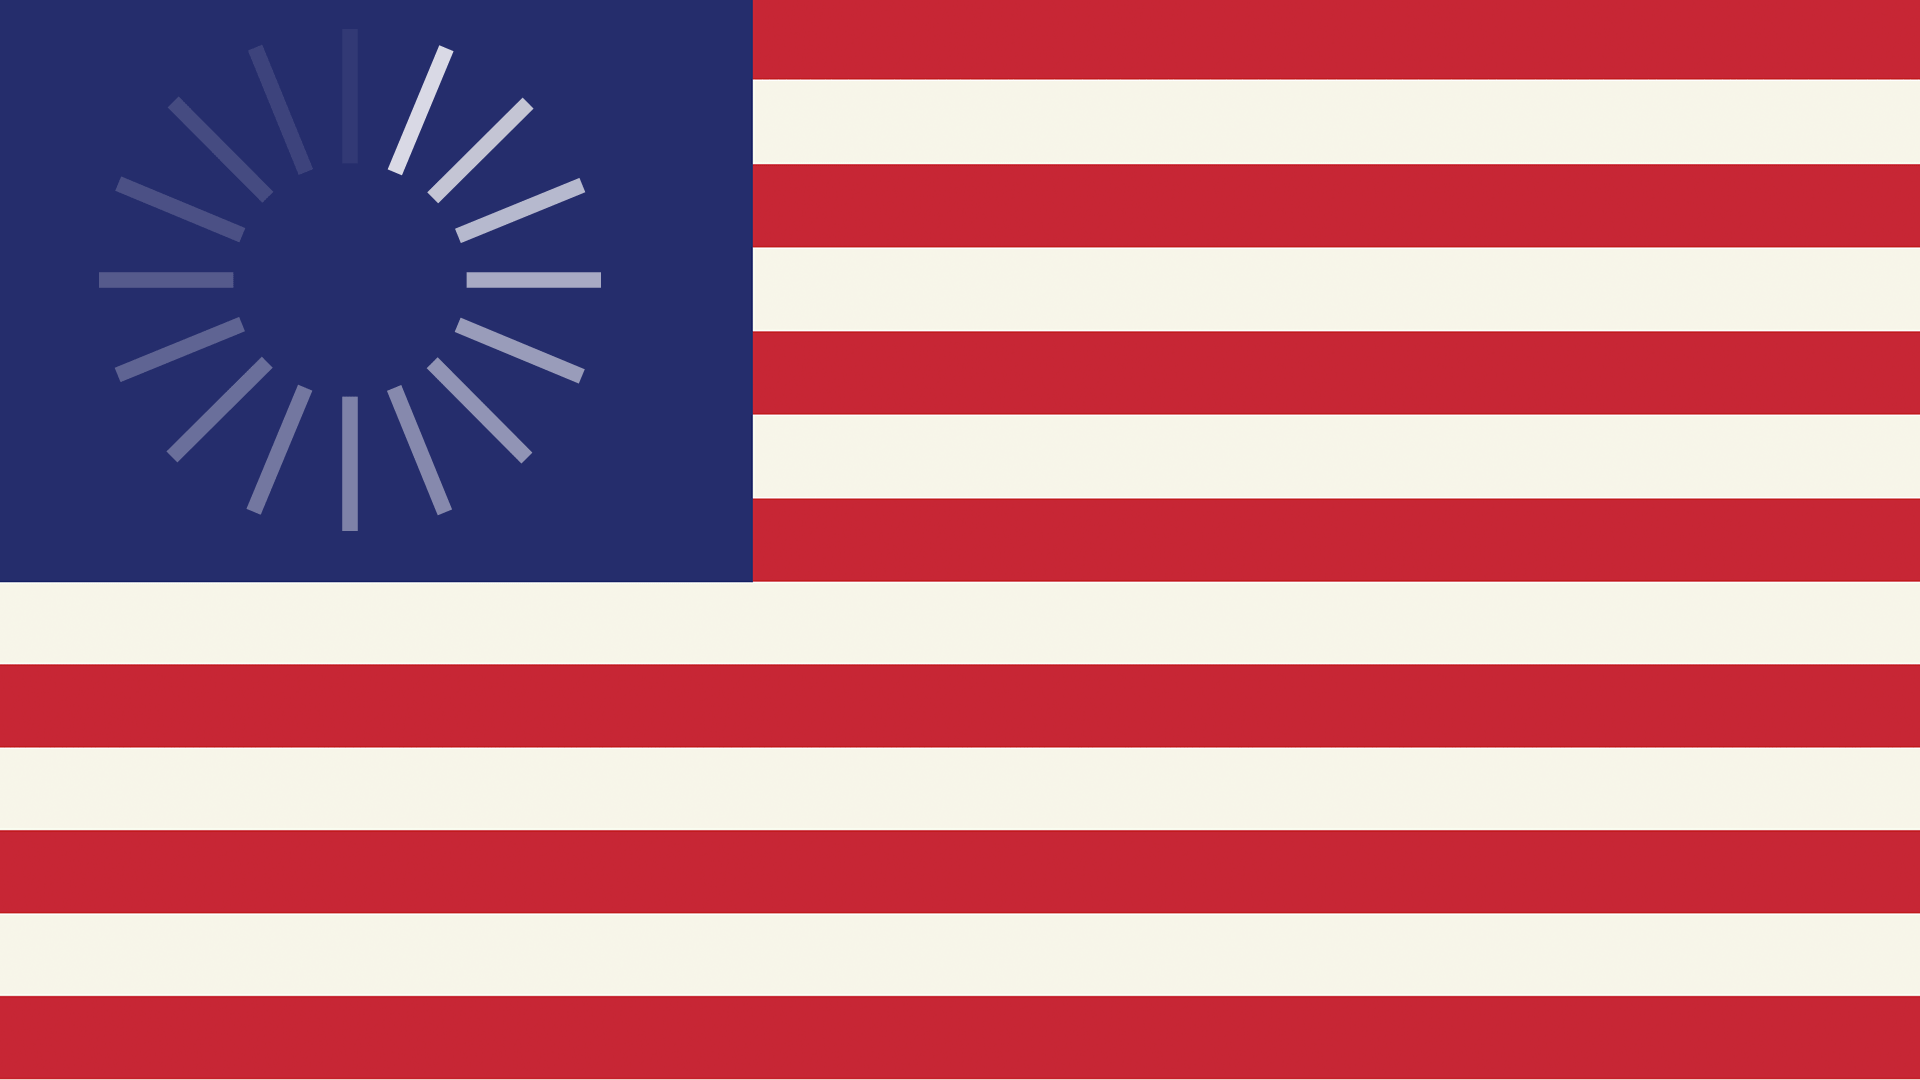 Animated illustration of the United States flag with the stars replaced by a loading circle.